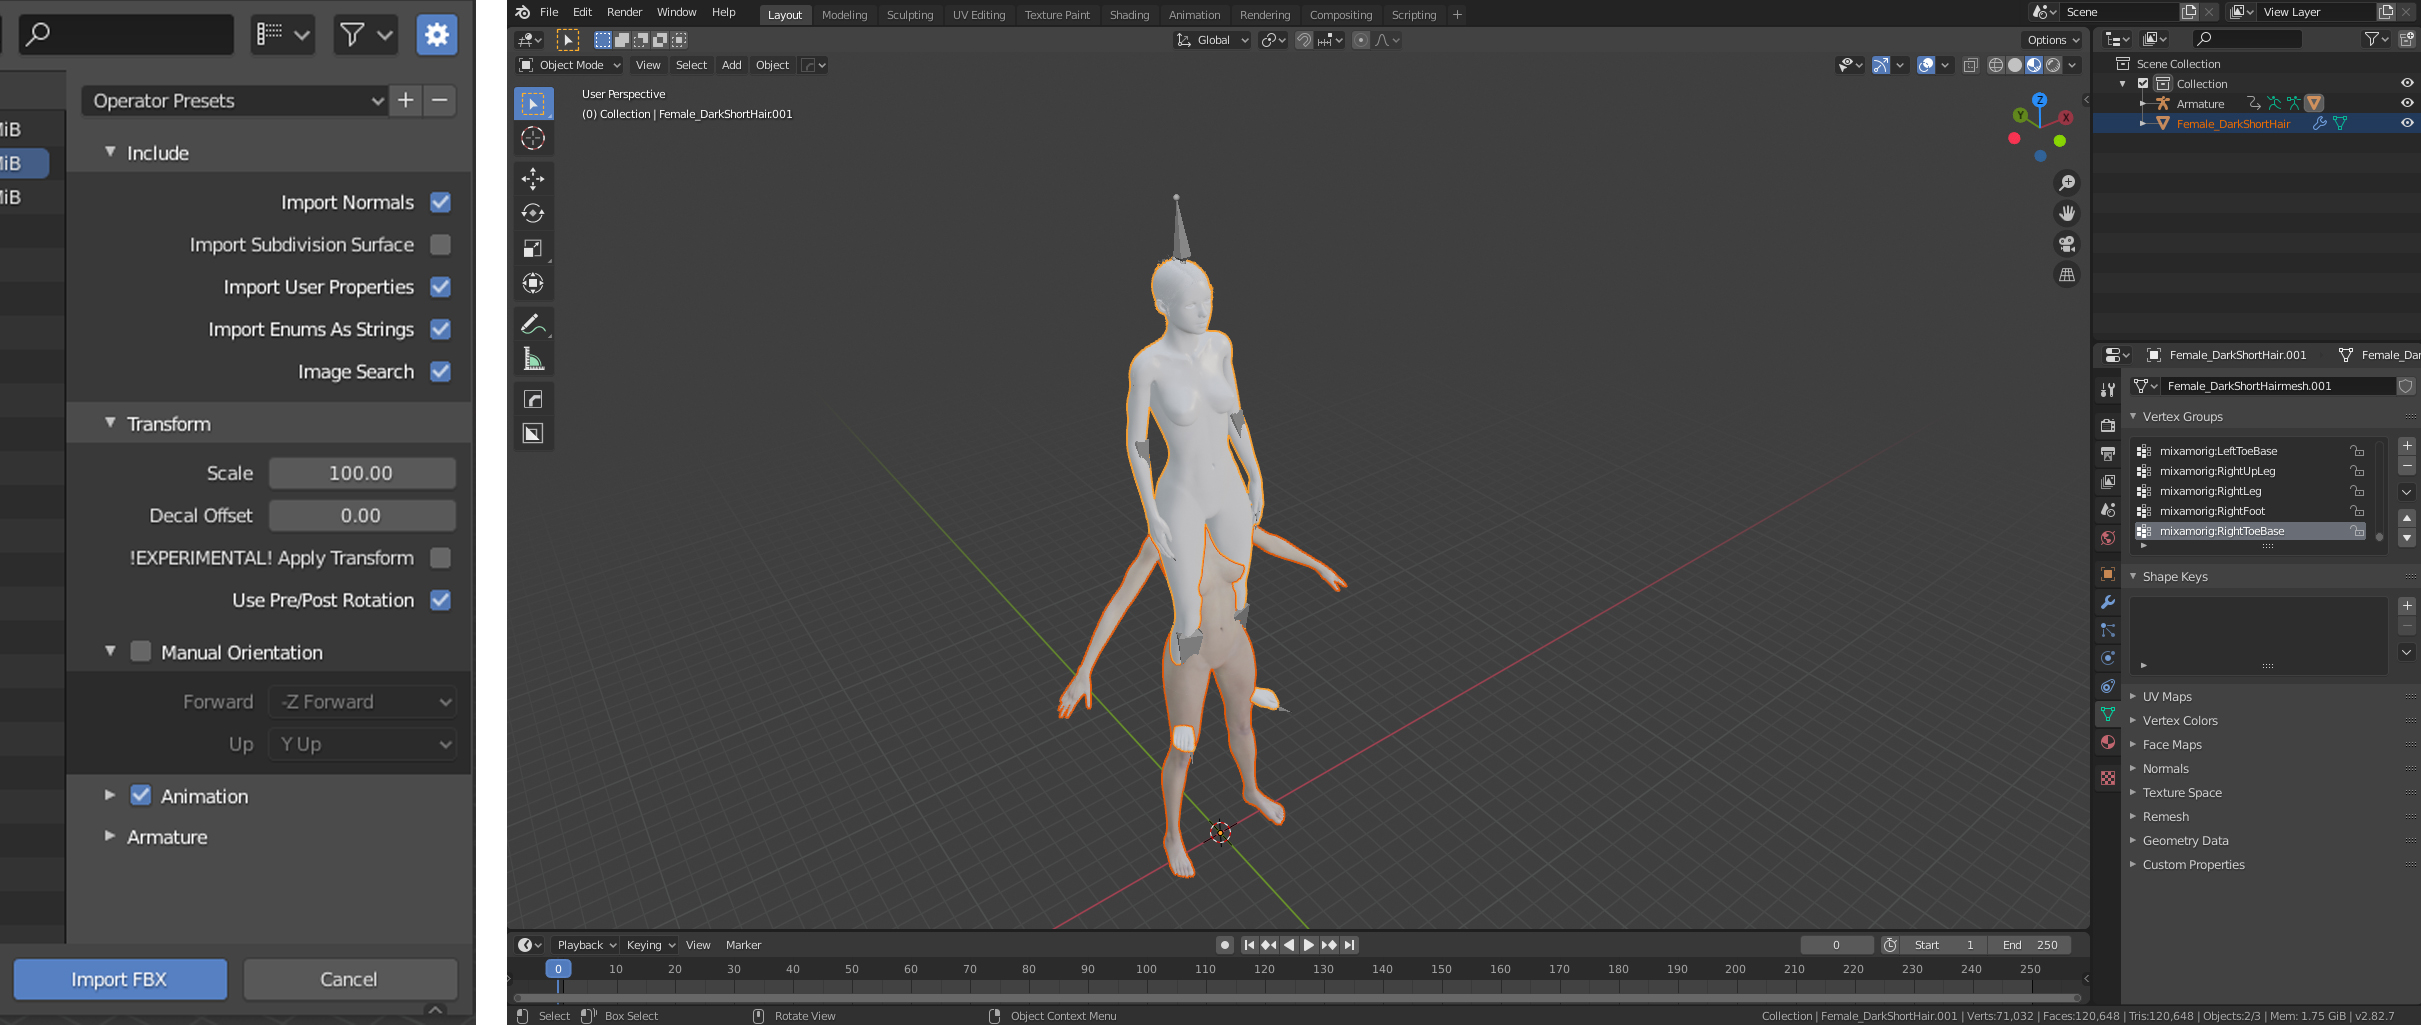 pose mode - Blender outliner what are the differences between the little  green men? - Blender Stack Exchange